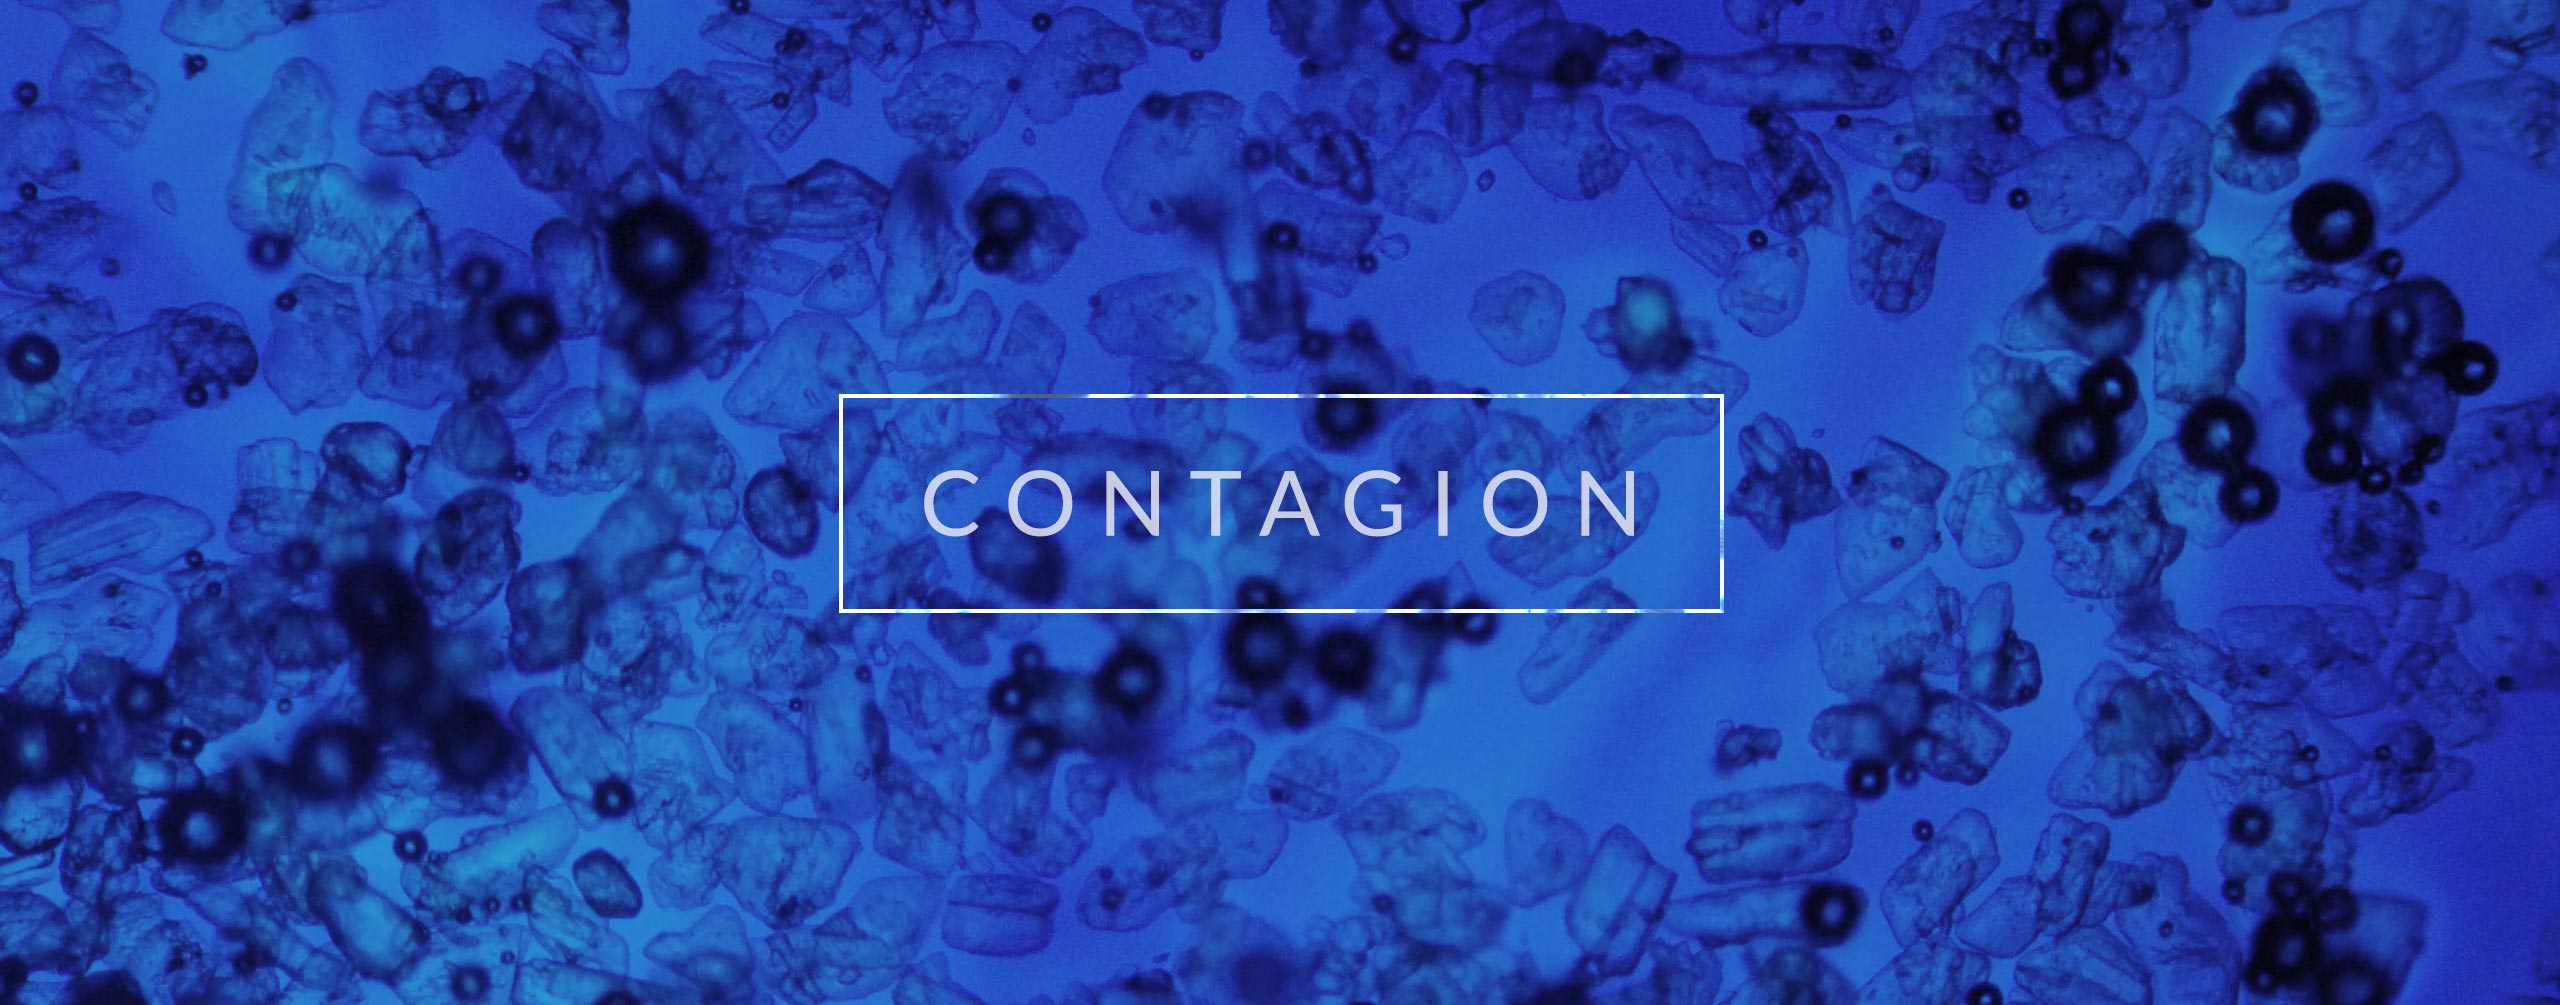 Contagion - Microscopic Effects